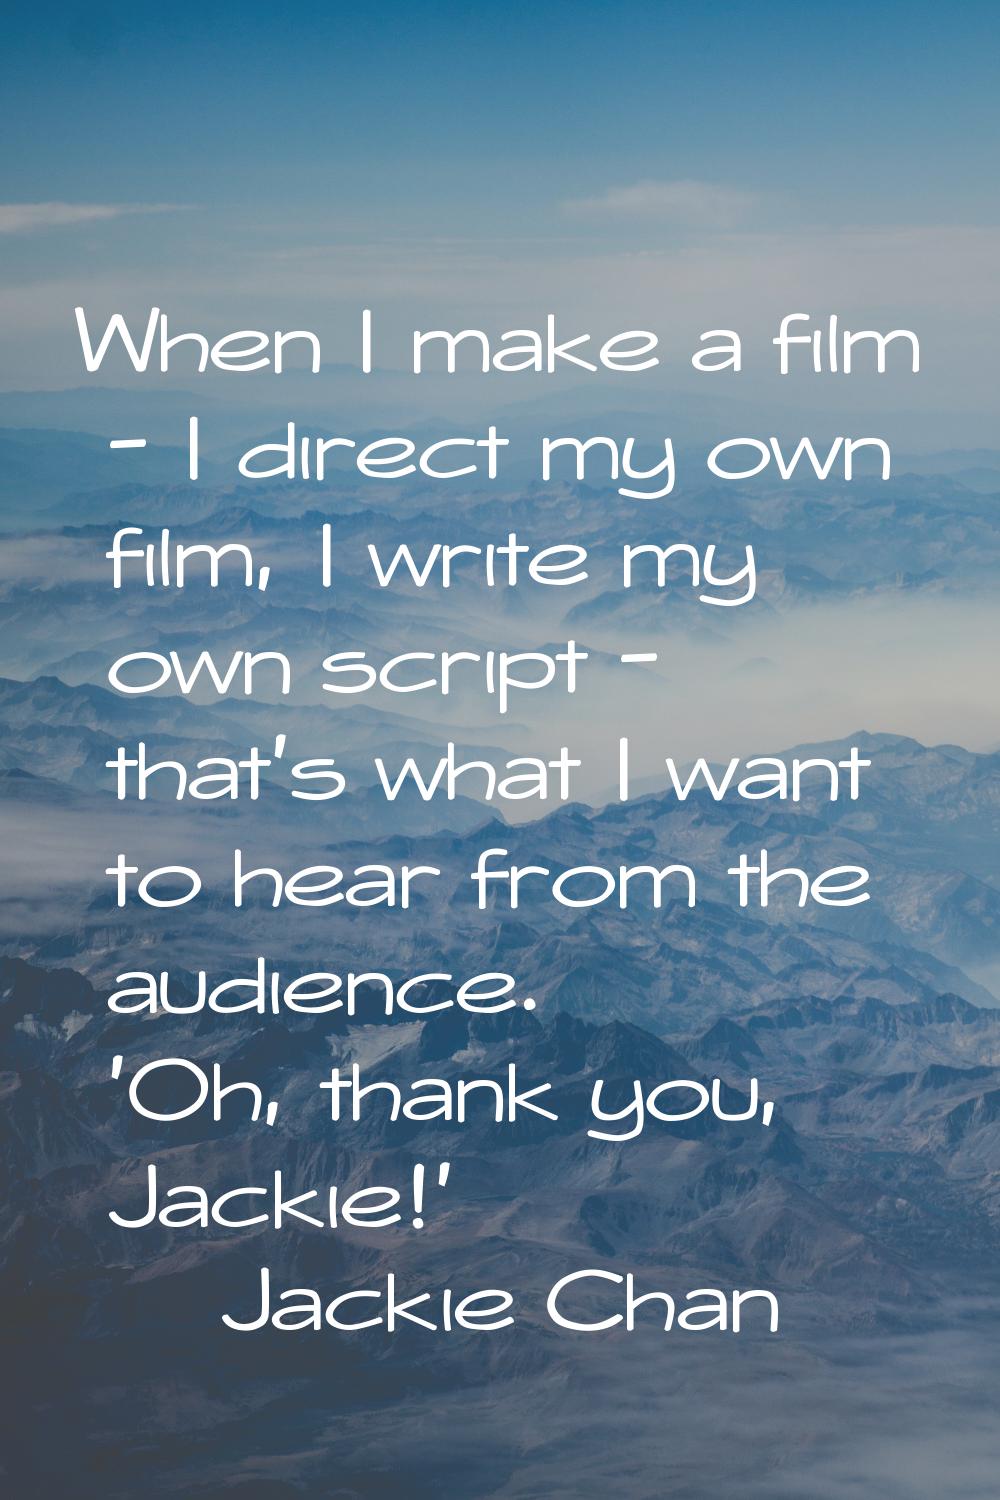 When I make a film - I direct my own film, I write my own script - that's what I want to hear from 